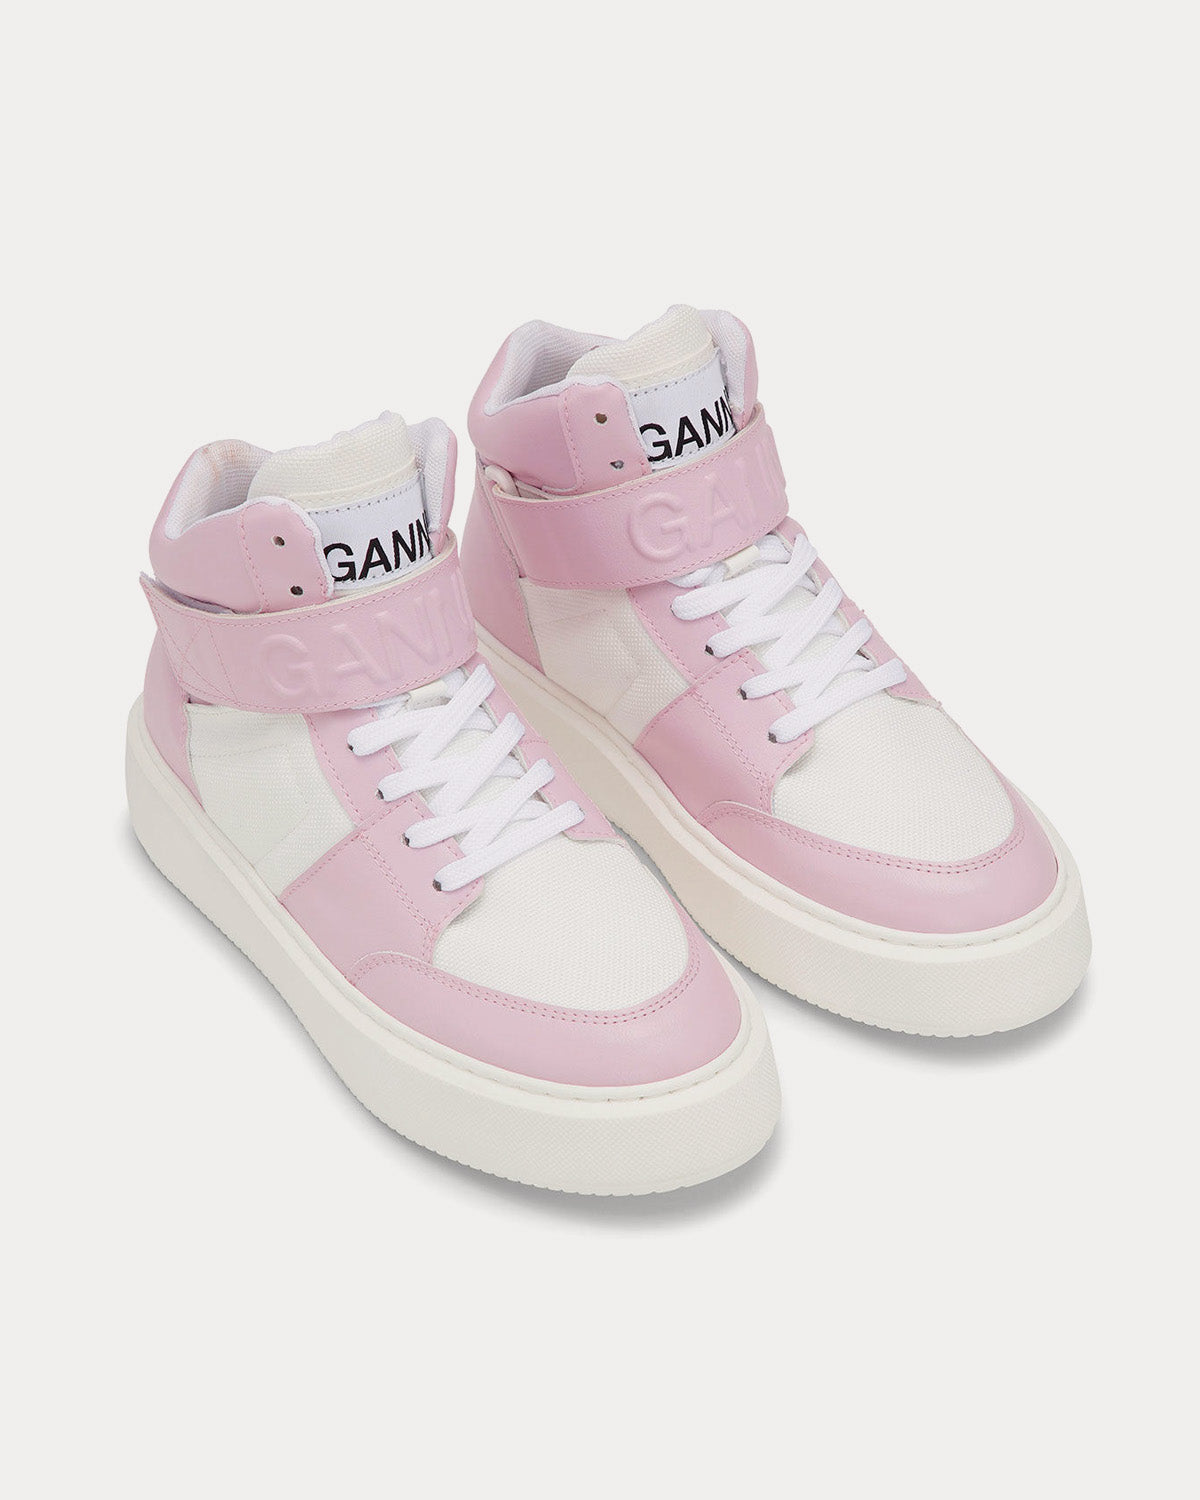 Ganni - Sporty Mix Light Lilac High Top Sneakers